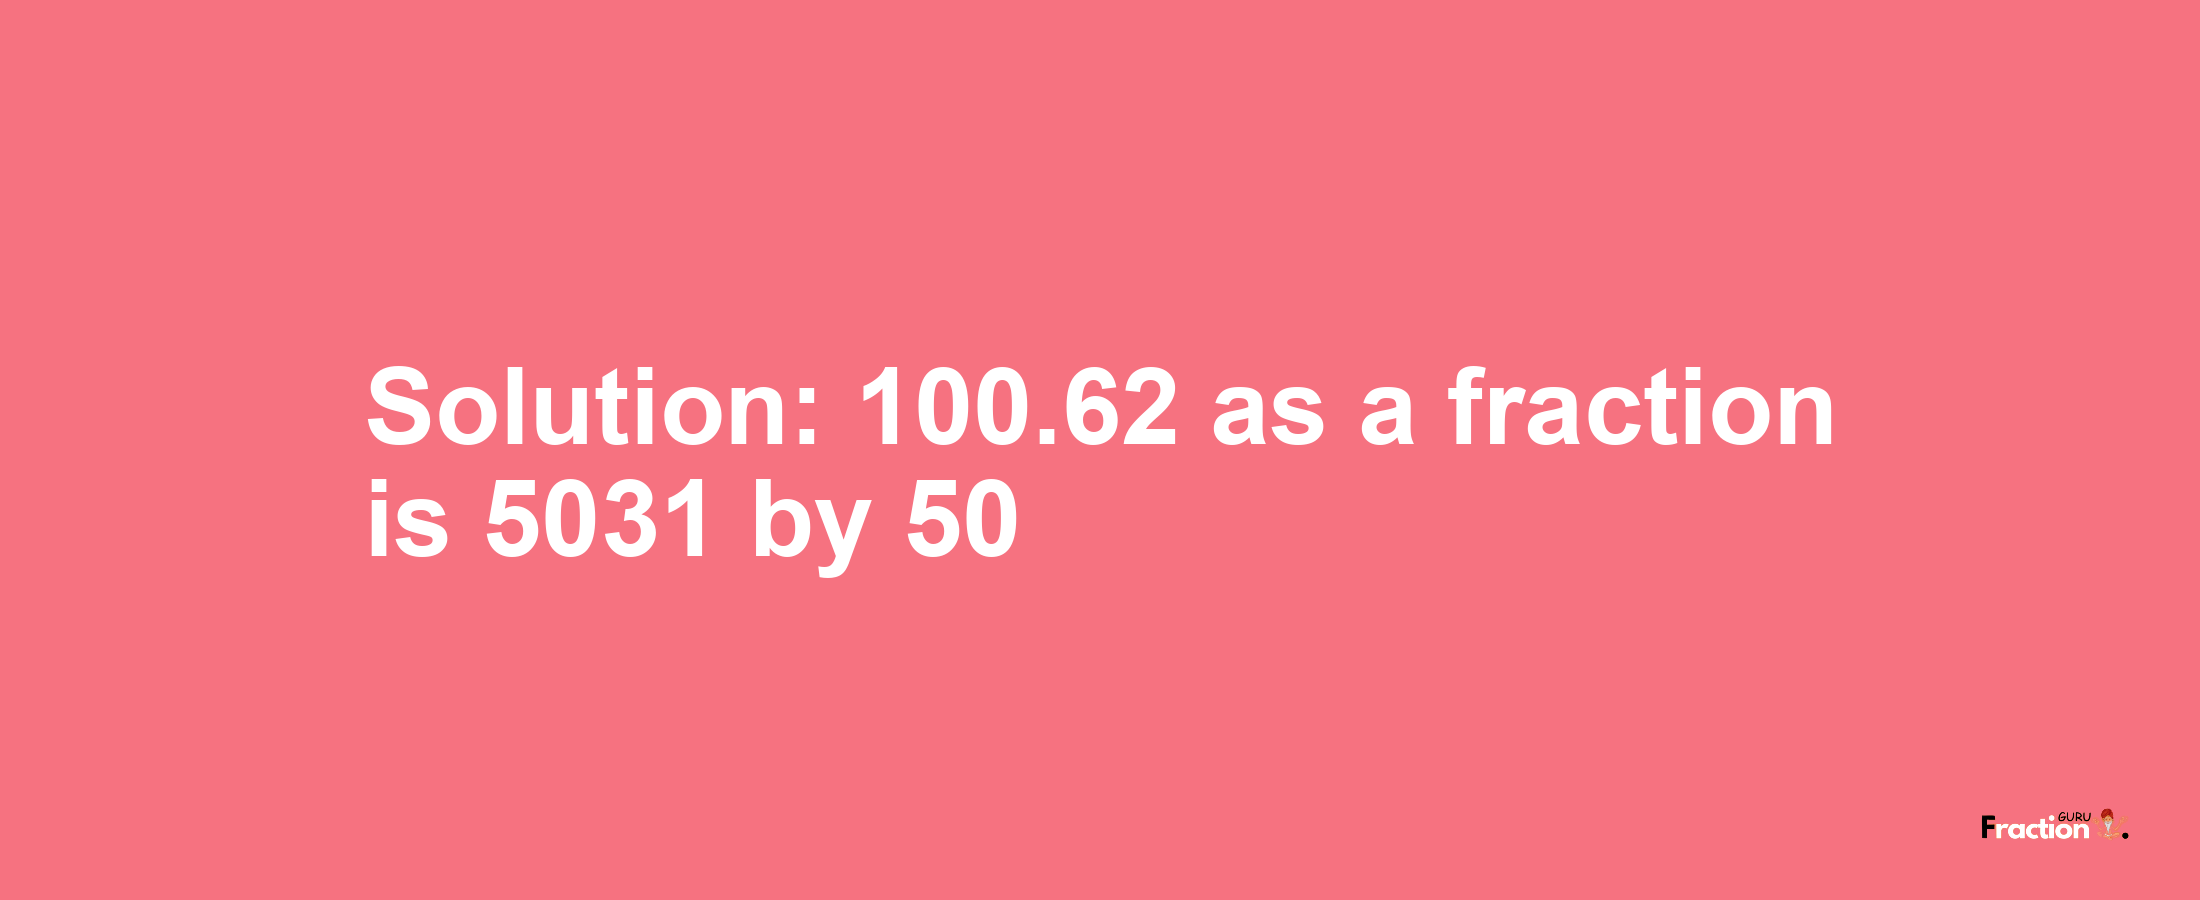 Solution:100.62 as a fraction is 5031/50